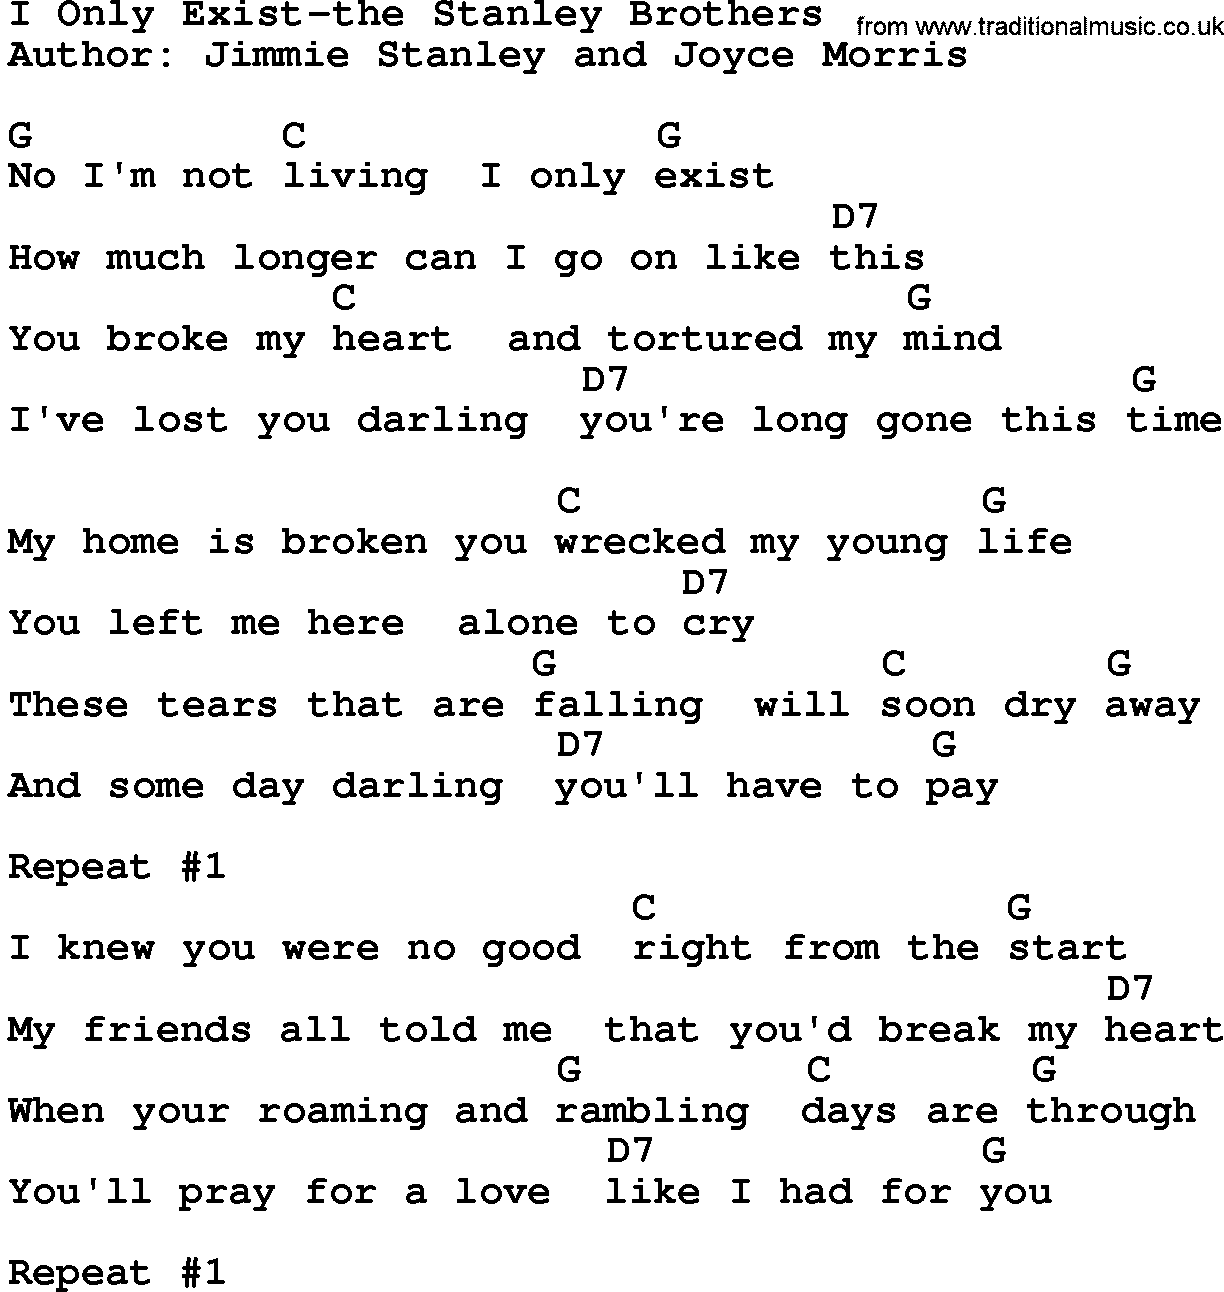 Country music song: I Only Exist-The Stanley Brothers lyrics and chords